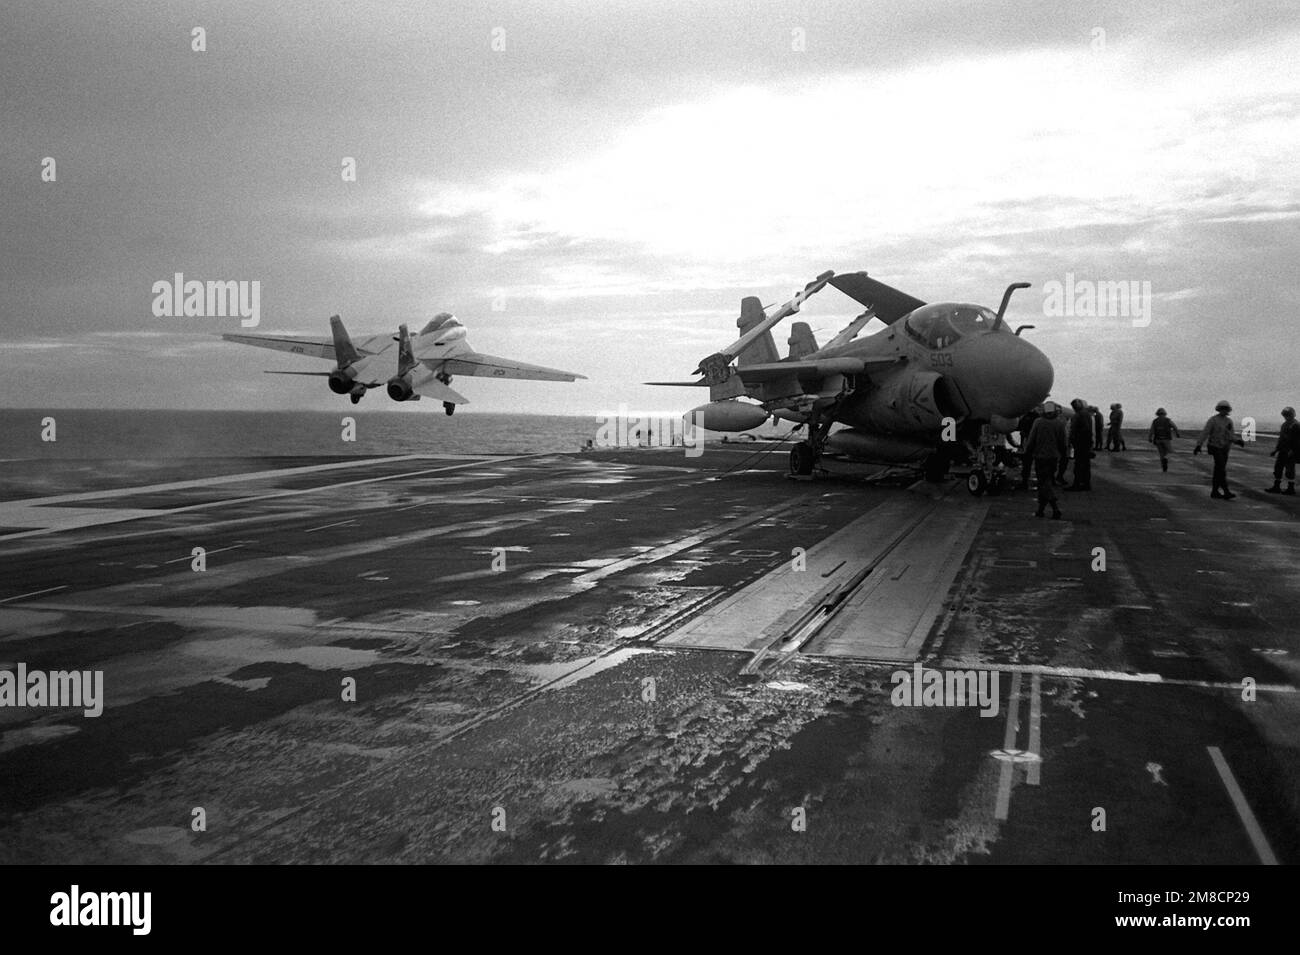 A Fighter Squadron 84 (VF-84) F-14A Tomcat aircraft, left, is launched from one of the waist catapults aboard the nuclear-powered aircraft carrier USS ABRAHAM LINCOLN (CVN-72). An attack squadron 65 (VA-65) A-6E Intruder aircraft is at right. Country: Atlantic Ocean (AOC) Stock Photo